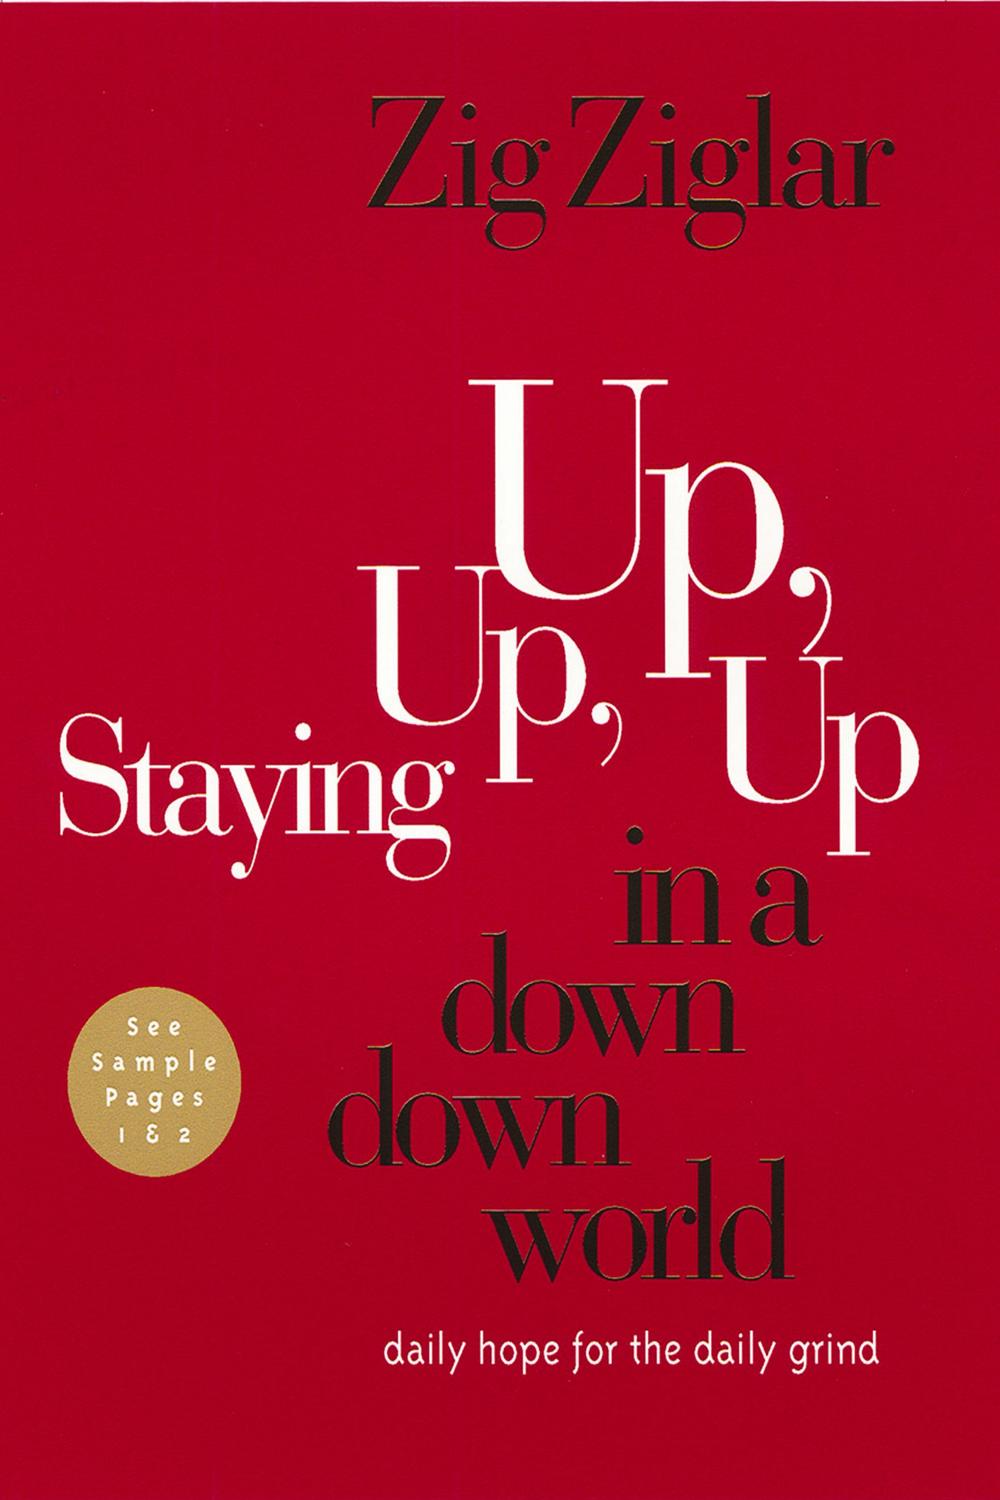 Staying Up, Up, Up in a Down, Down World - Zig Ziglar,,